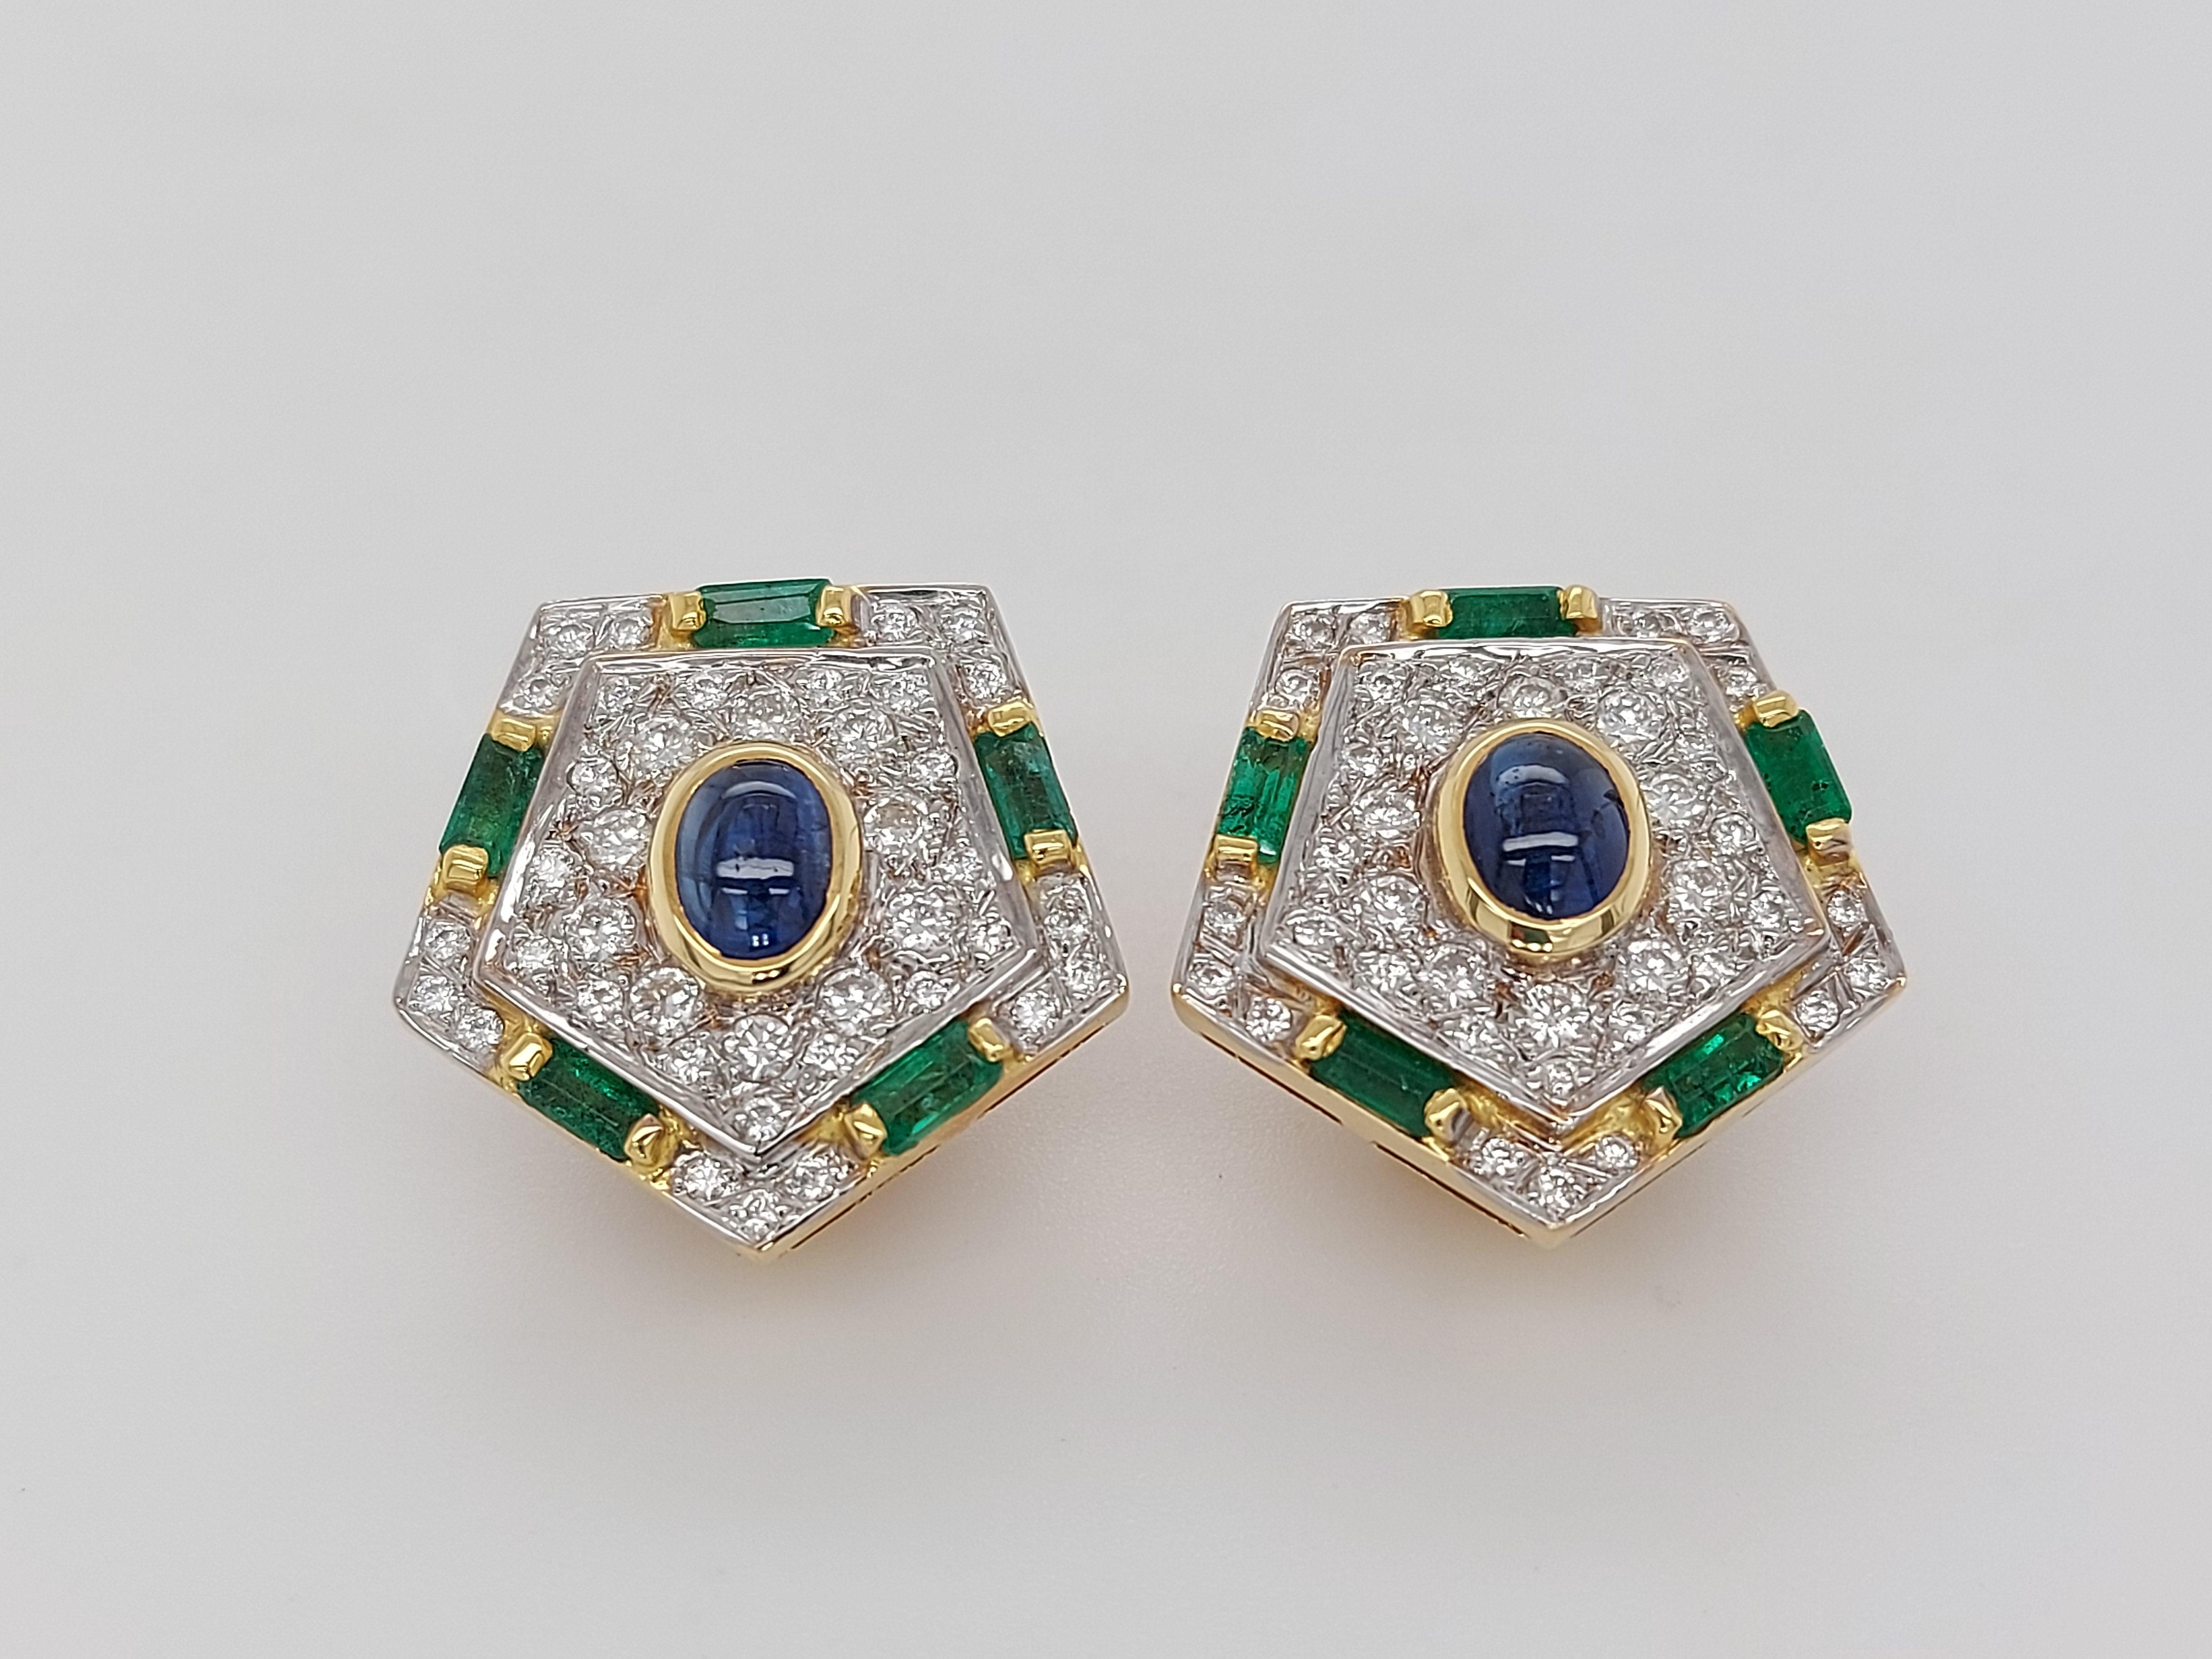 Luxurious Gold Clip-On Earrings With Diamonds, Emerald and Cabochon Sapphire For Sale 2